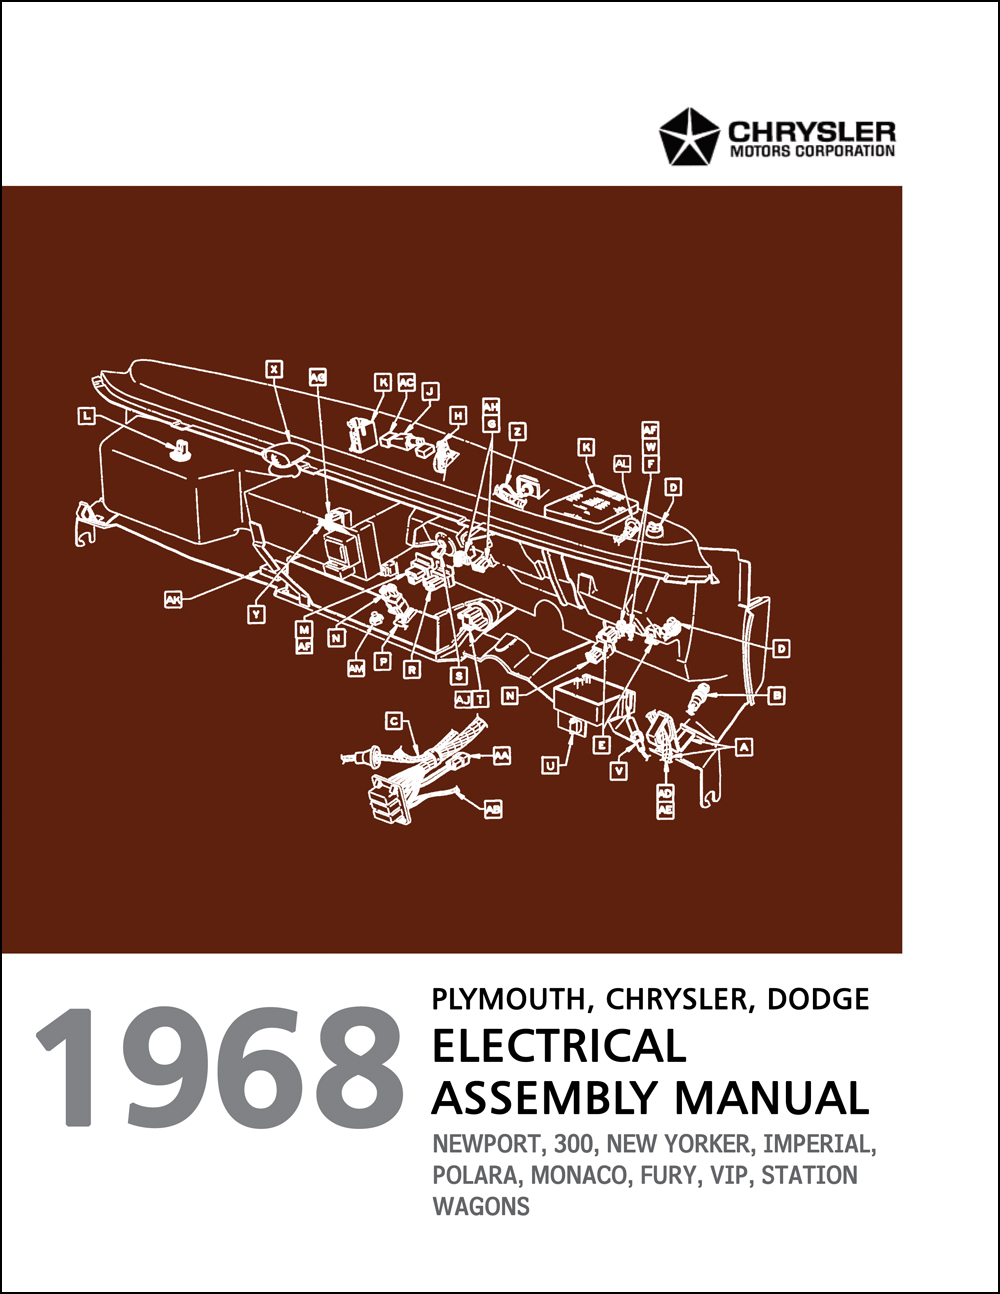 1968 Chrysler, Dodge, and Plymouth Big Car Electrical Assembly Manual Reprint